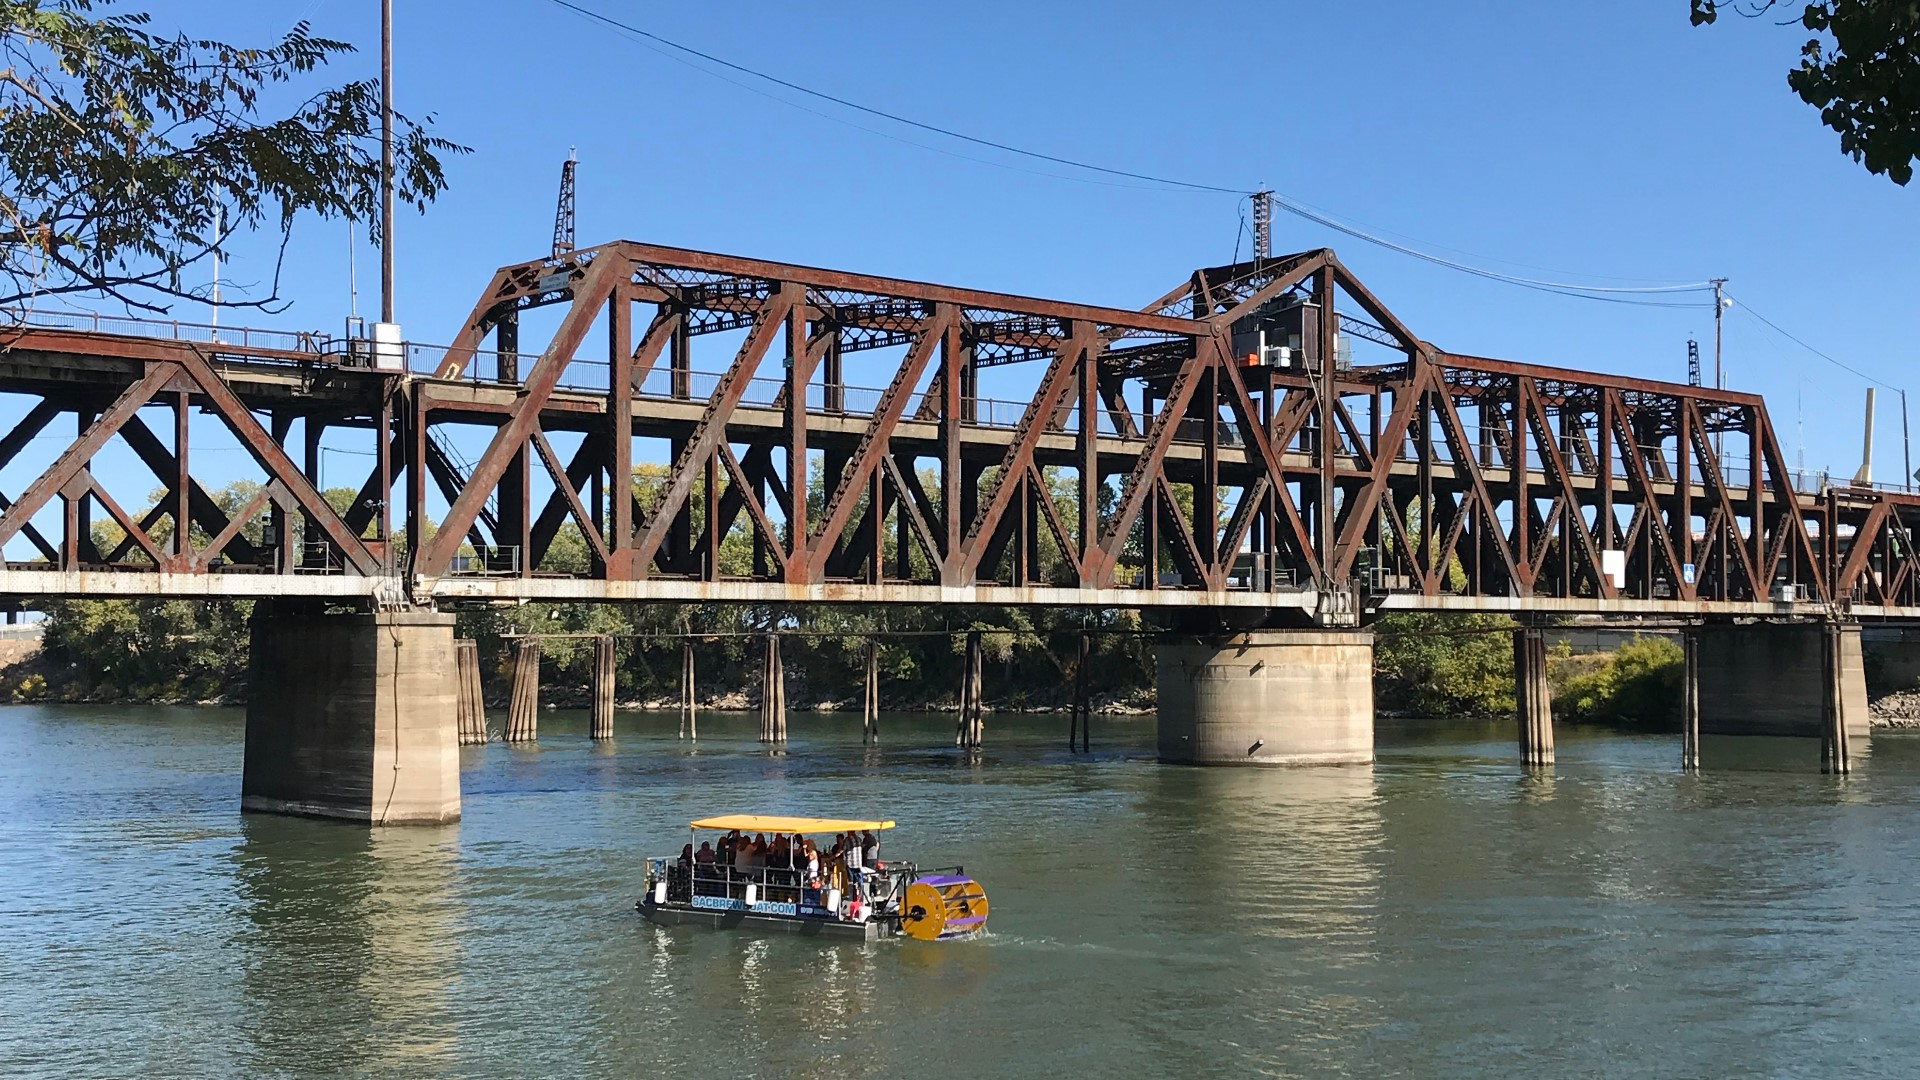 The new I Street Bridge will unite Sacramento and West Sacramento while the upper deck of the current I Street Bridge will be redesigned for pedestrians and bikes.